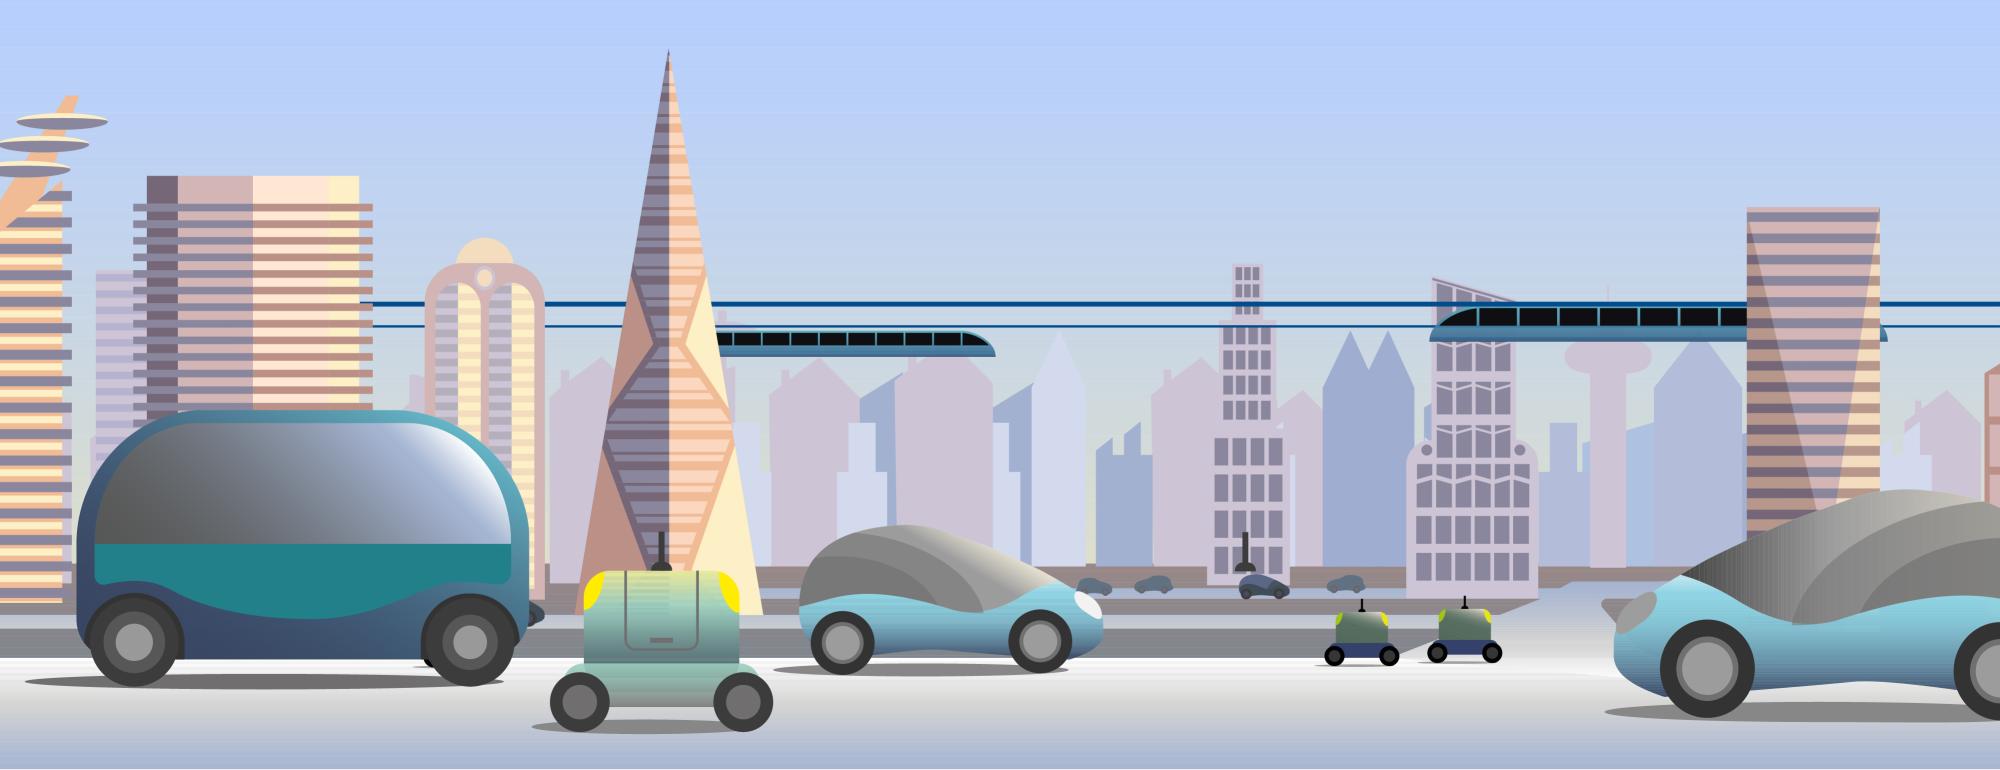 Automated vehicles in a city landscape